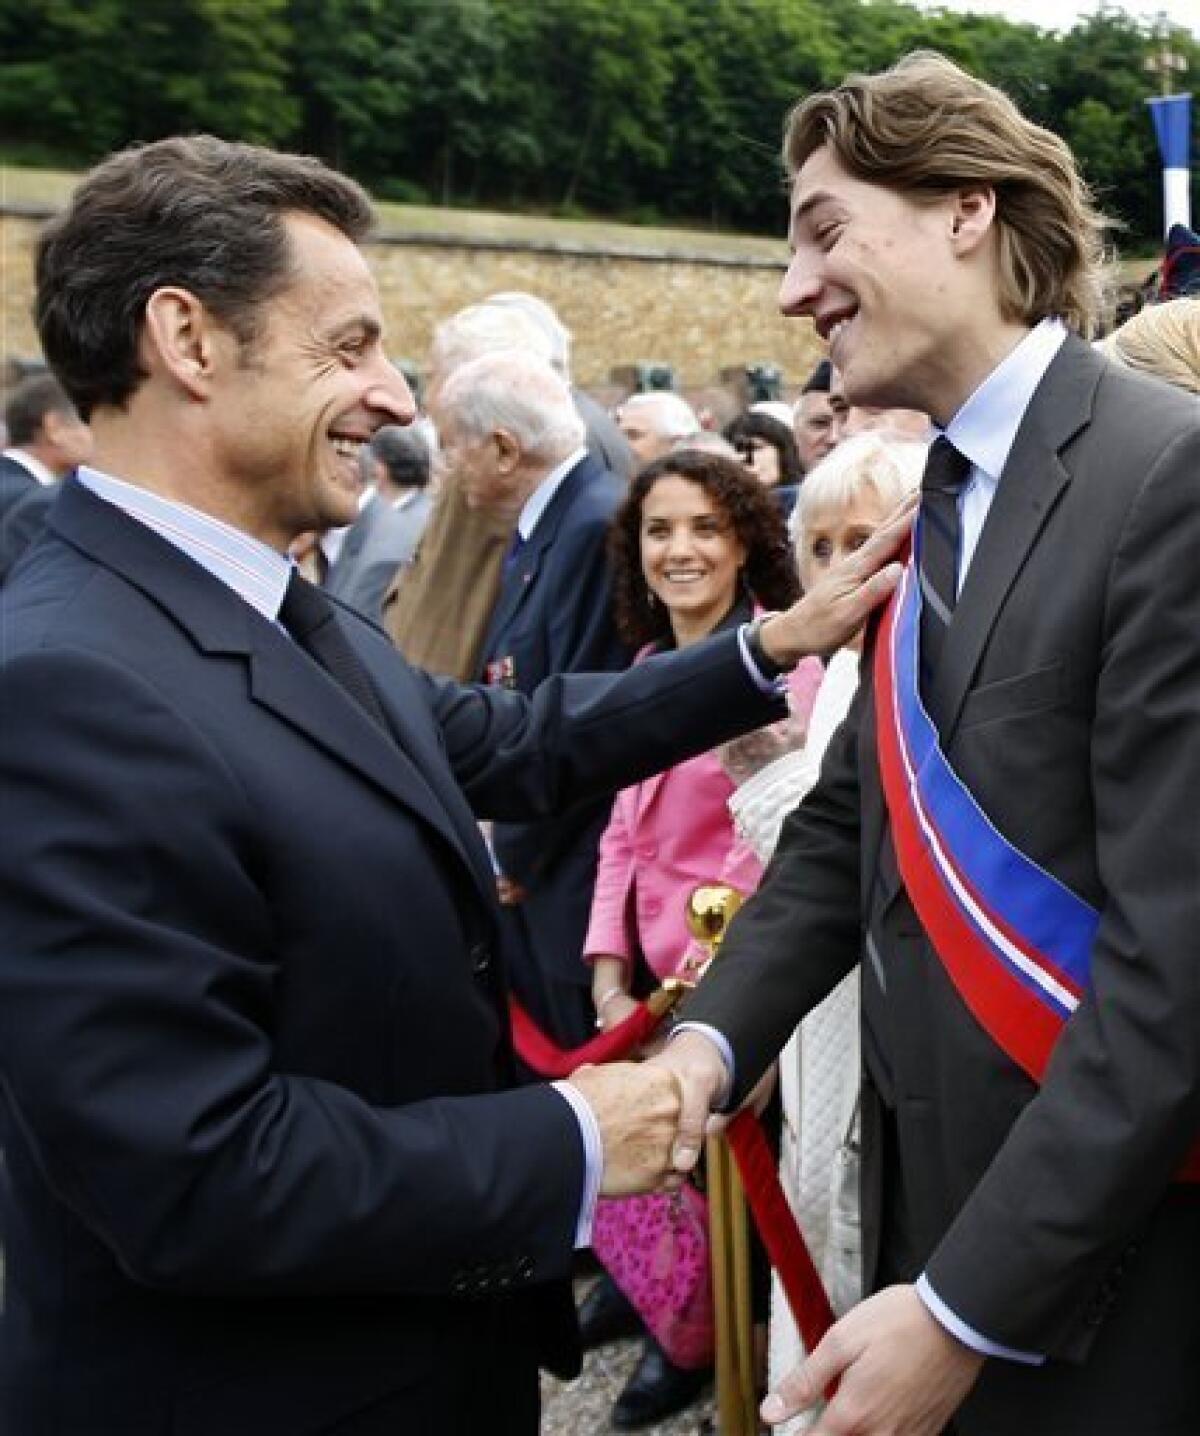 FILE - This June 18, 2009 file photo shows French President Nicolas Sarkozy, left, shaking hands with his son Jean Sarkozy during a commemorative ceremony at the Mont Valerien memorial in Suresnes, west of Paris. Amid fierce accusations of favoritism, President Nicolas Sarkozy's son Jean renounced his candidacy Thursday Oct. 22, 2009 for the leadership of the organization that runs France's most important business district on the western edge of Paris. (AP Photo/Chales Platiau, pool, File)